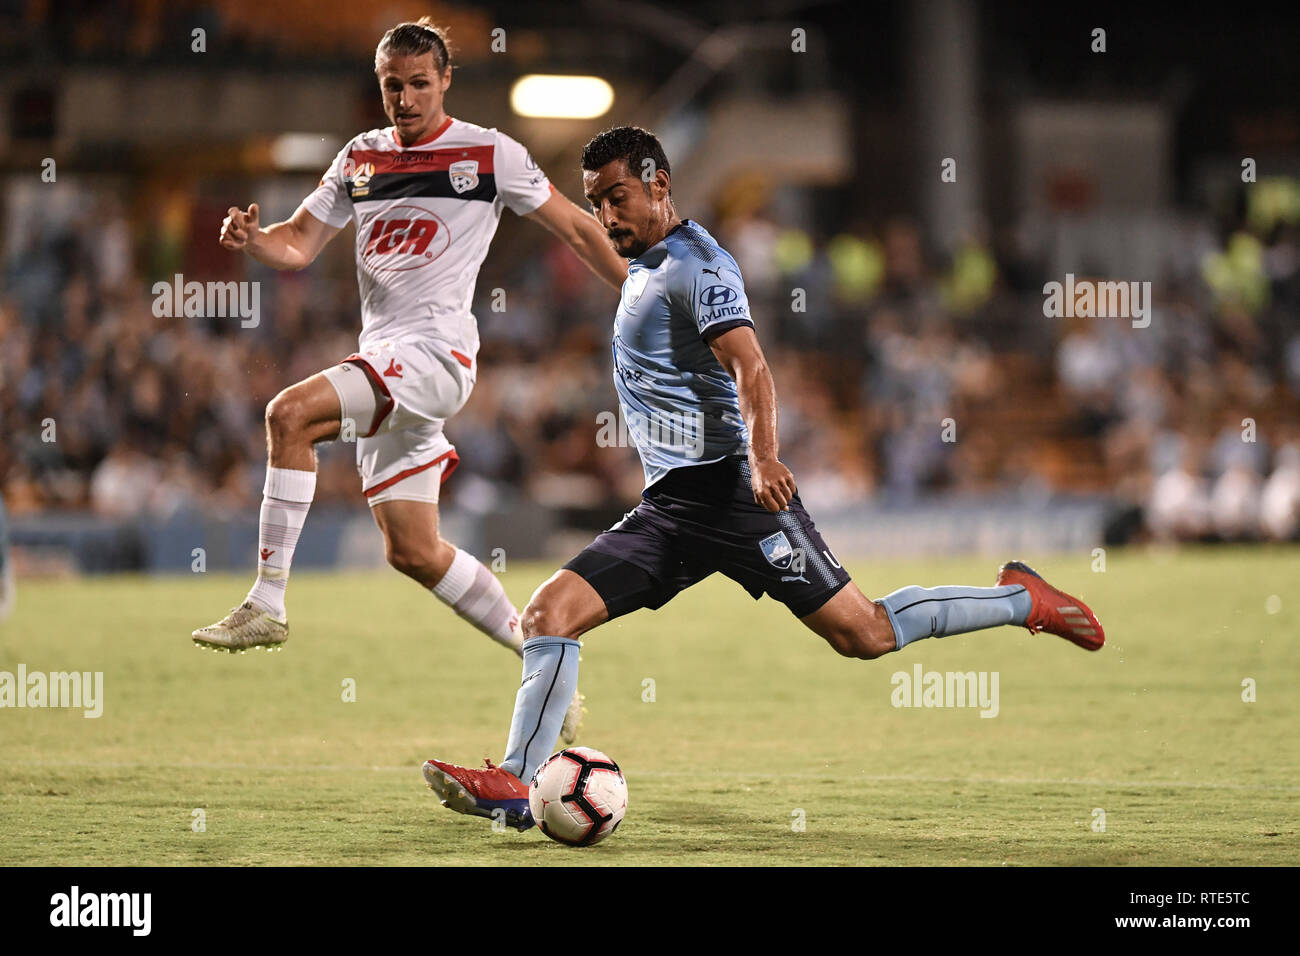 Leichhardt Oval, Leichhardt, Australia. 1st Mar, 2019. A League football Sydney FC versus Adelaide United; Reza Ghoochannejhad of Sydney takes a sht on goal as Michael Marrone of Adelaide United approaches Credit: Action Plus Sports/Alamy Live News Stock Photo